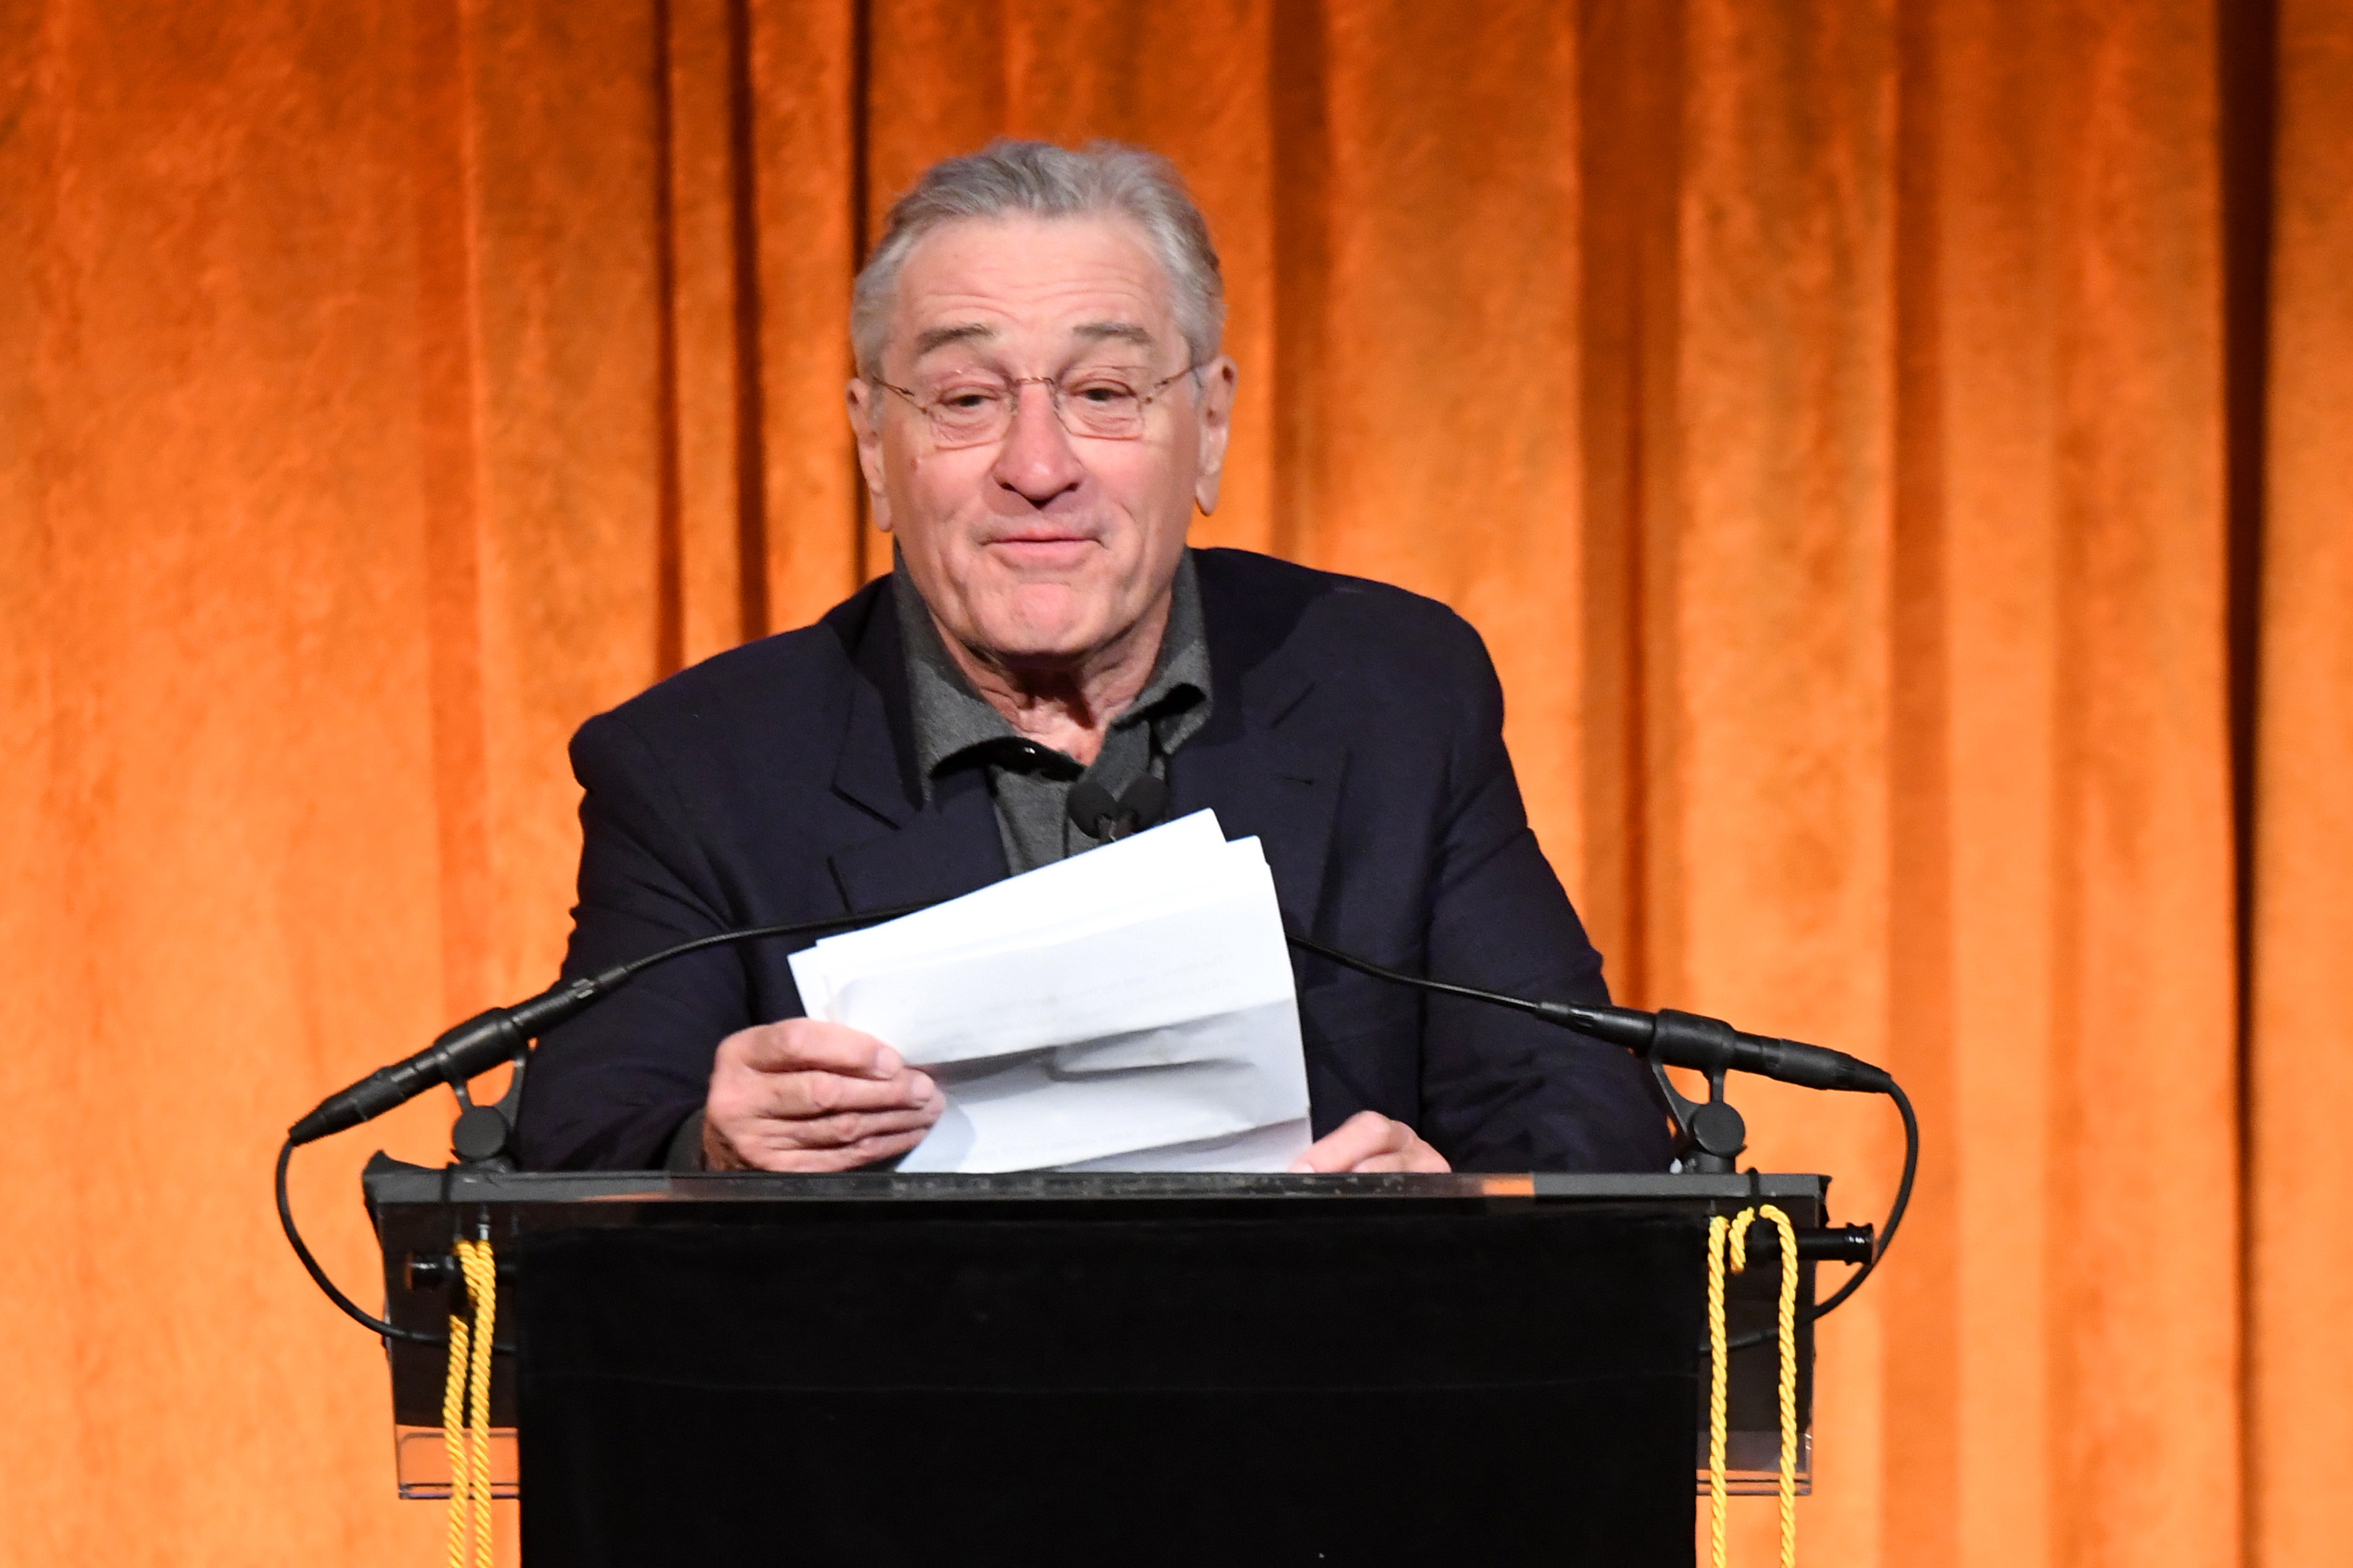 Robert De Niro speaks onstage during the National Board of Review Annual Awards Gala at Cipriani 42nd Street on January 9, 2018 in New York City (Dimitrios Kambouris&mdash;Getty Images for National Board of Review)